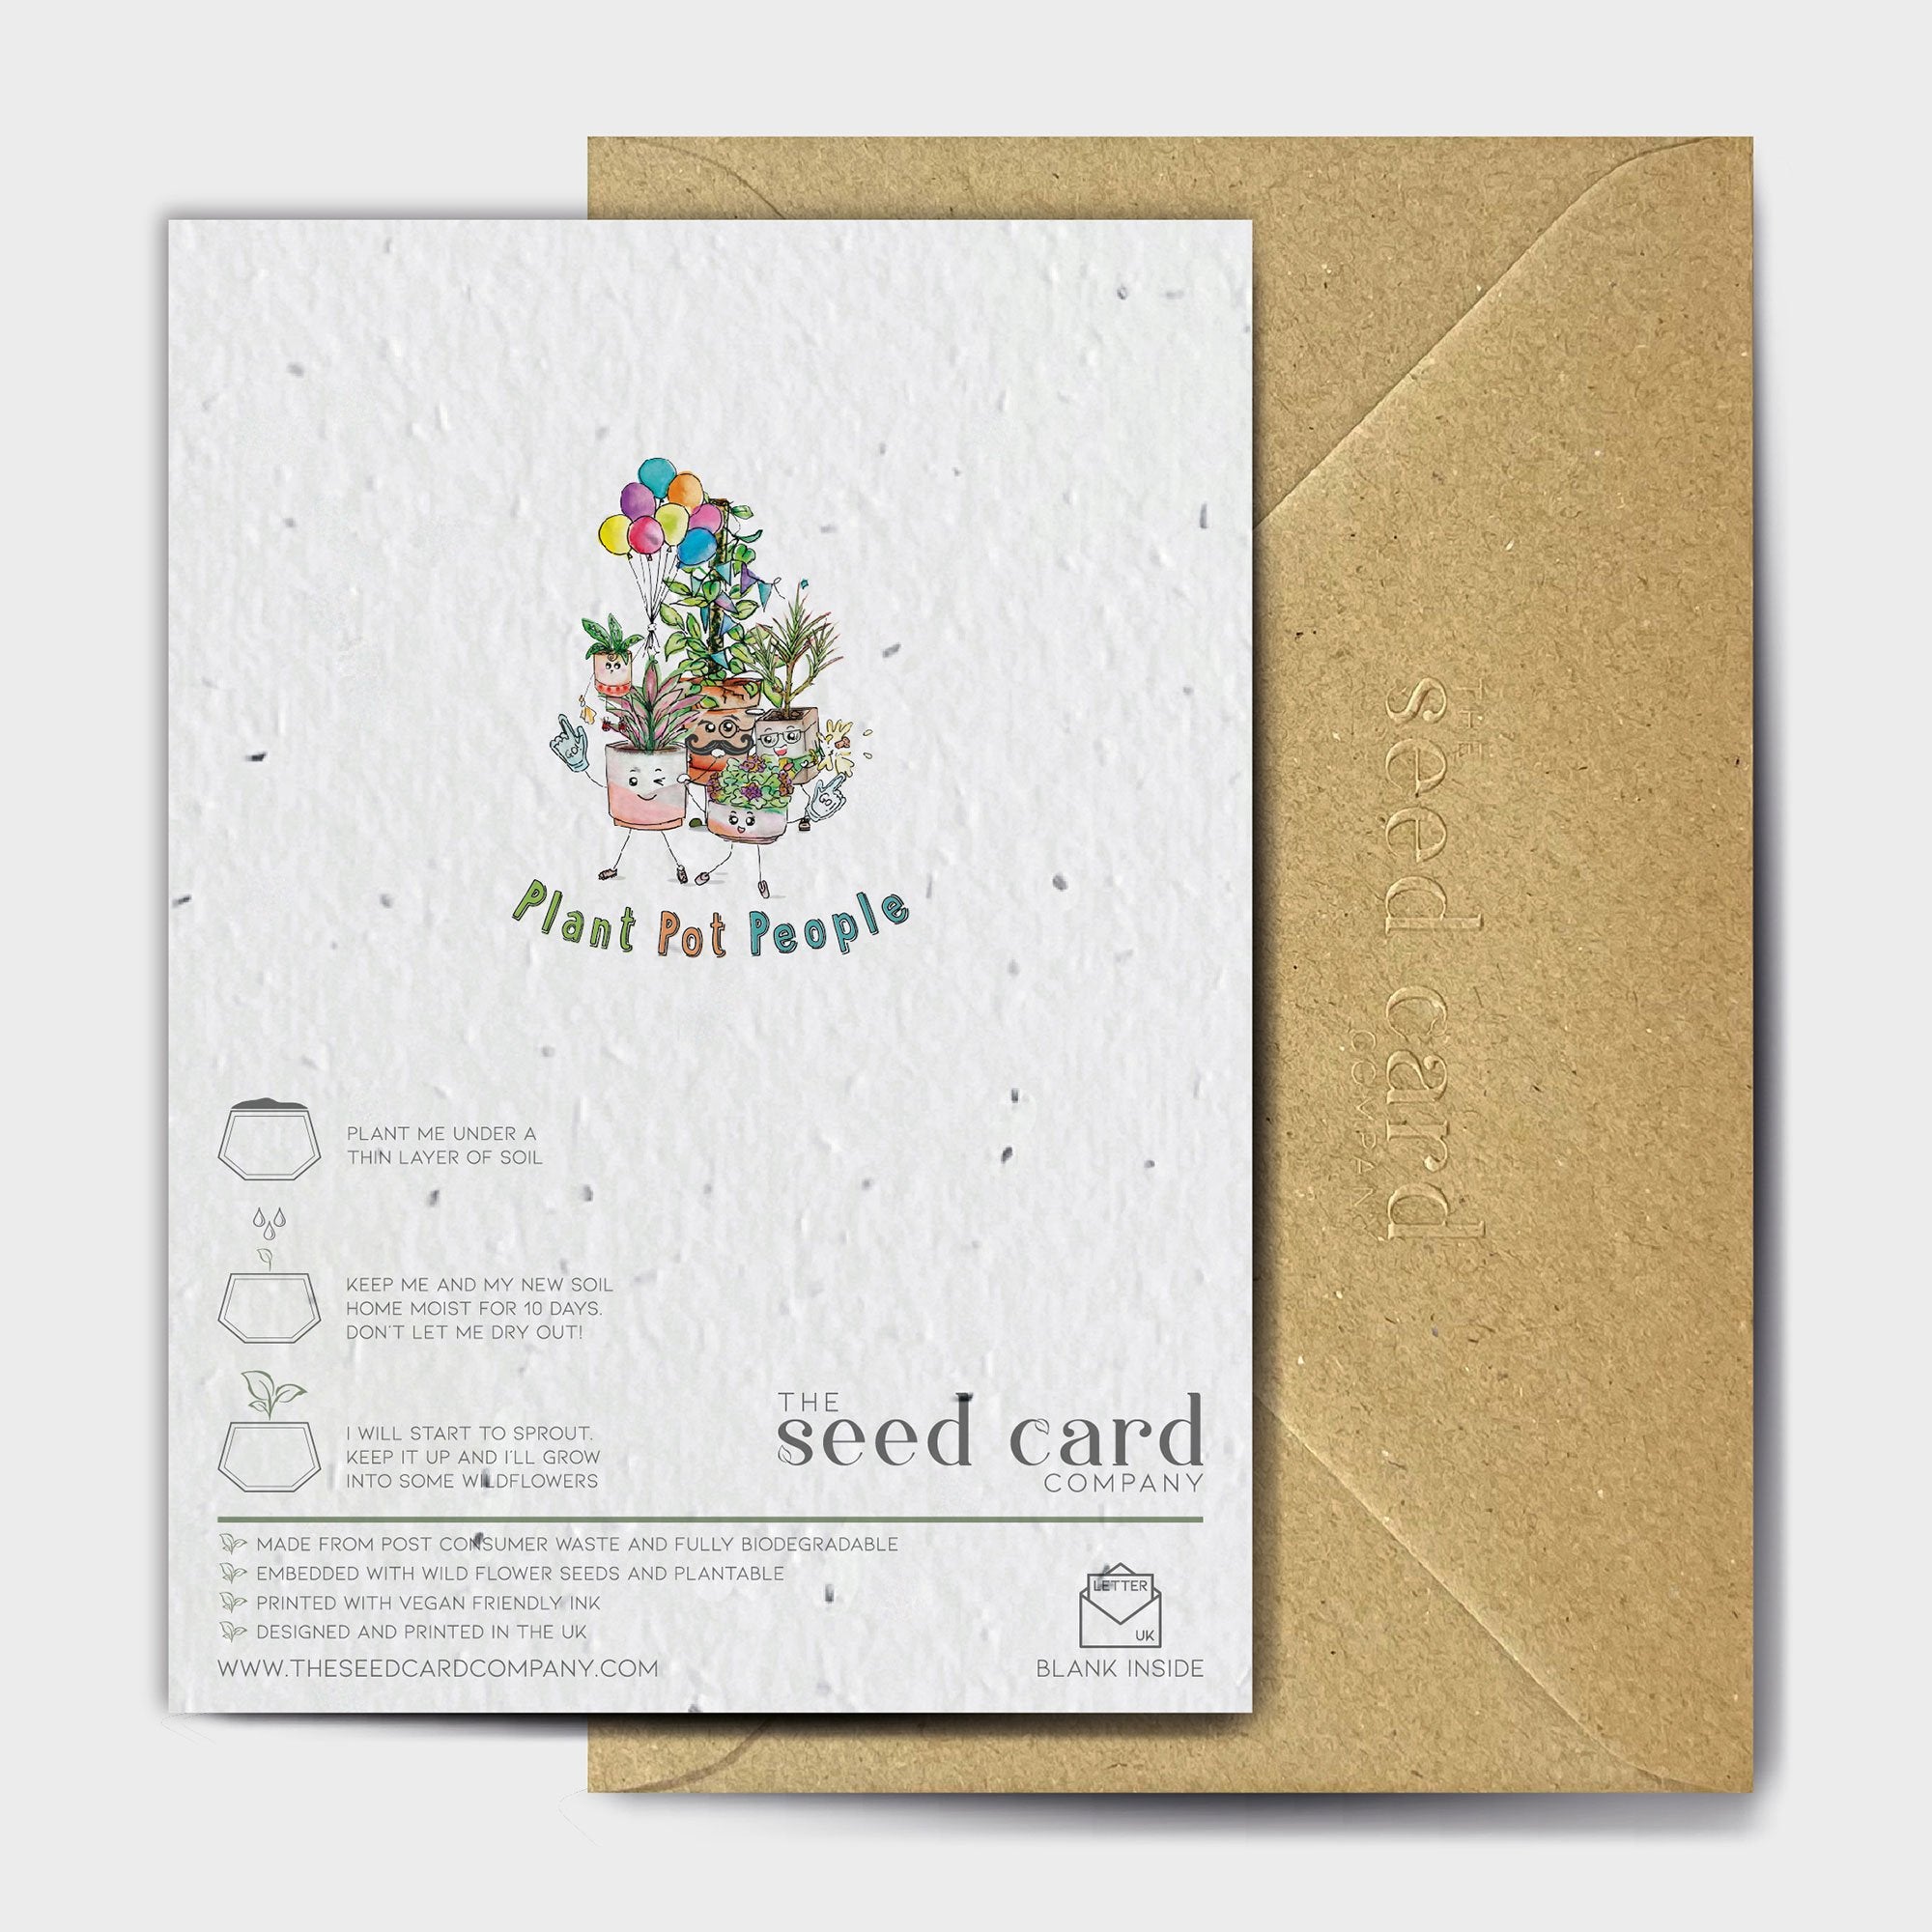 Shop online You Said Yes! - 100% biodegradable seed-embedded cards Shop -The Seed Card Company